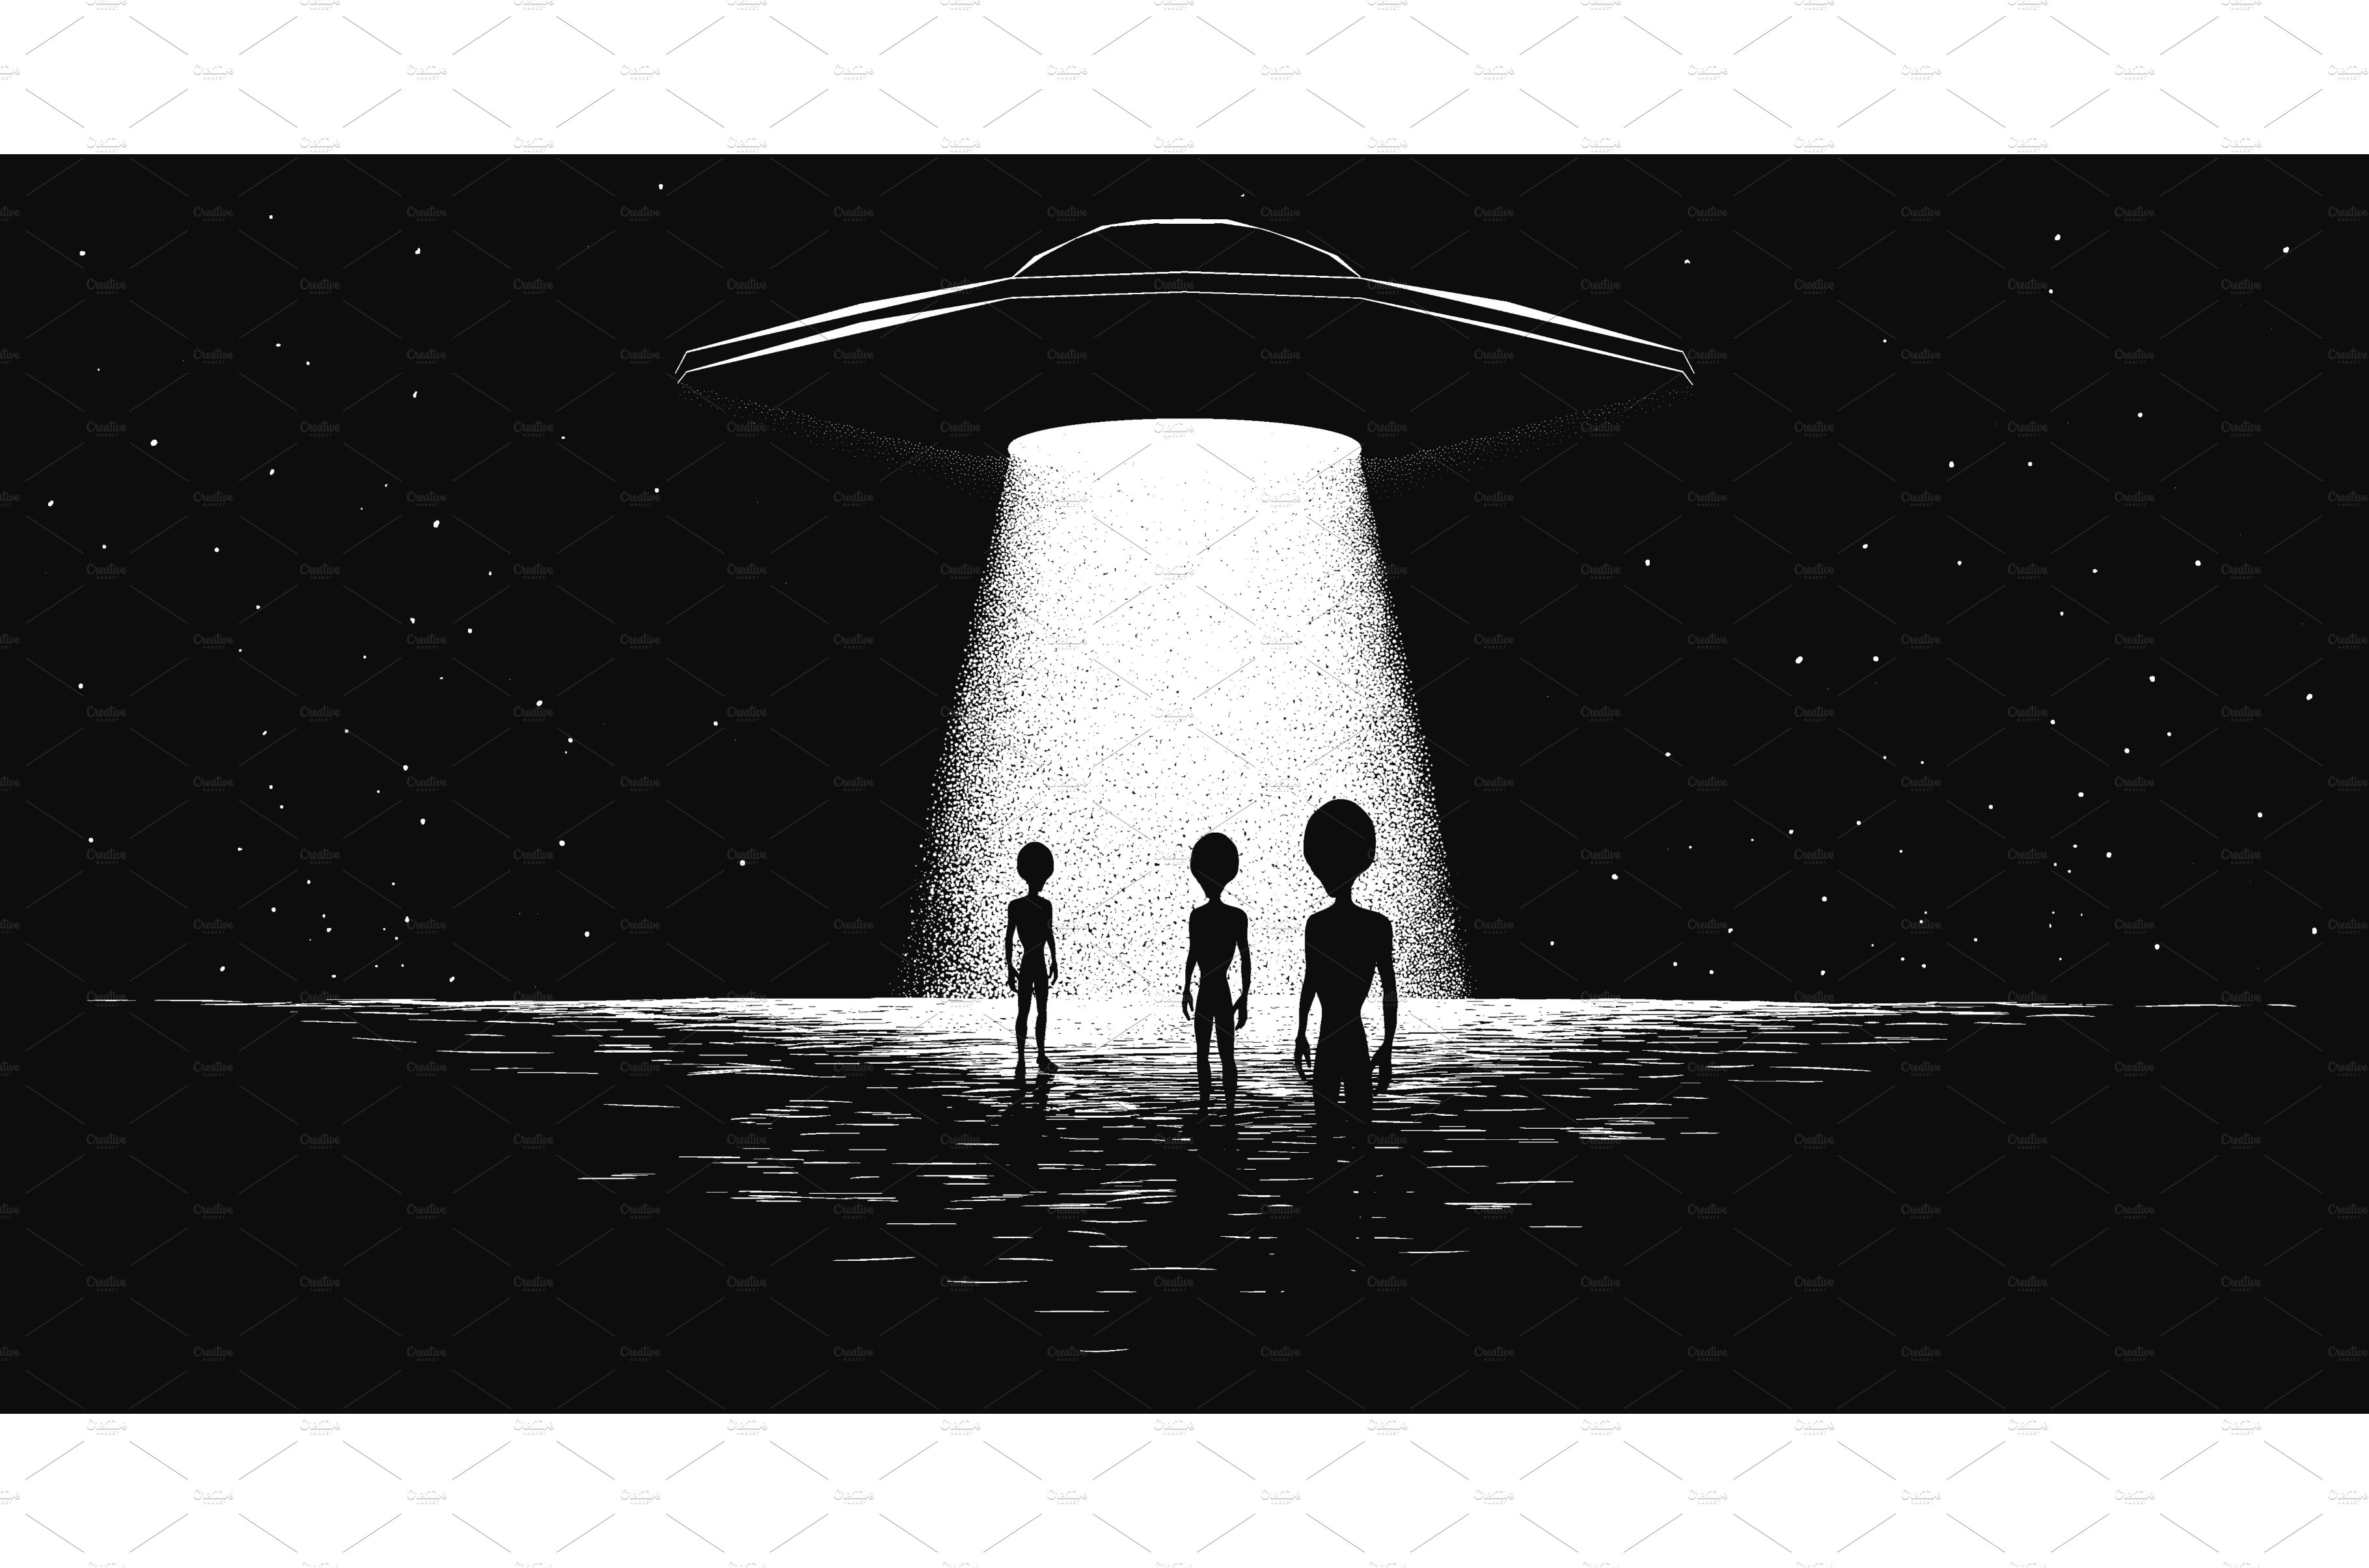 arrival of aliens to planet cover image.